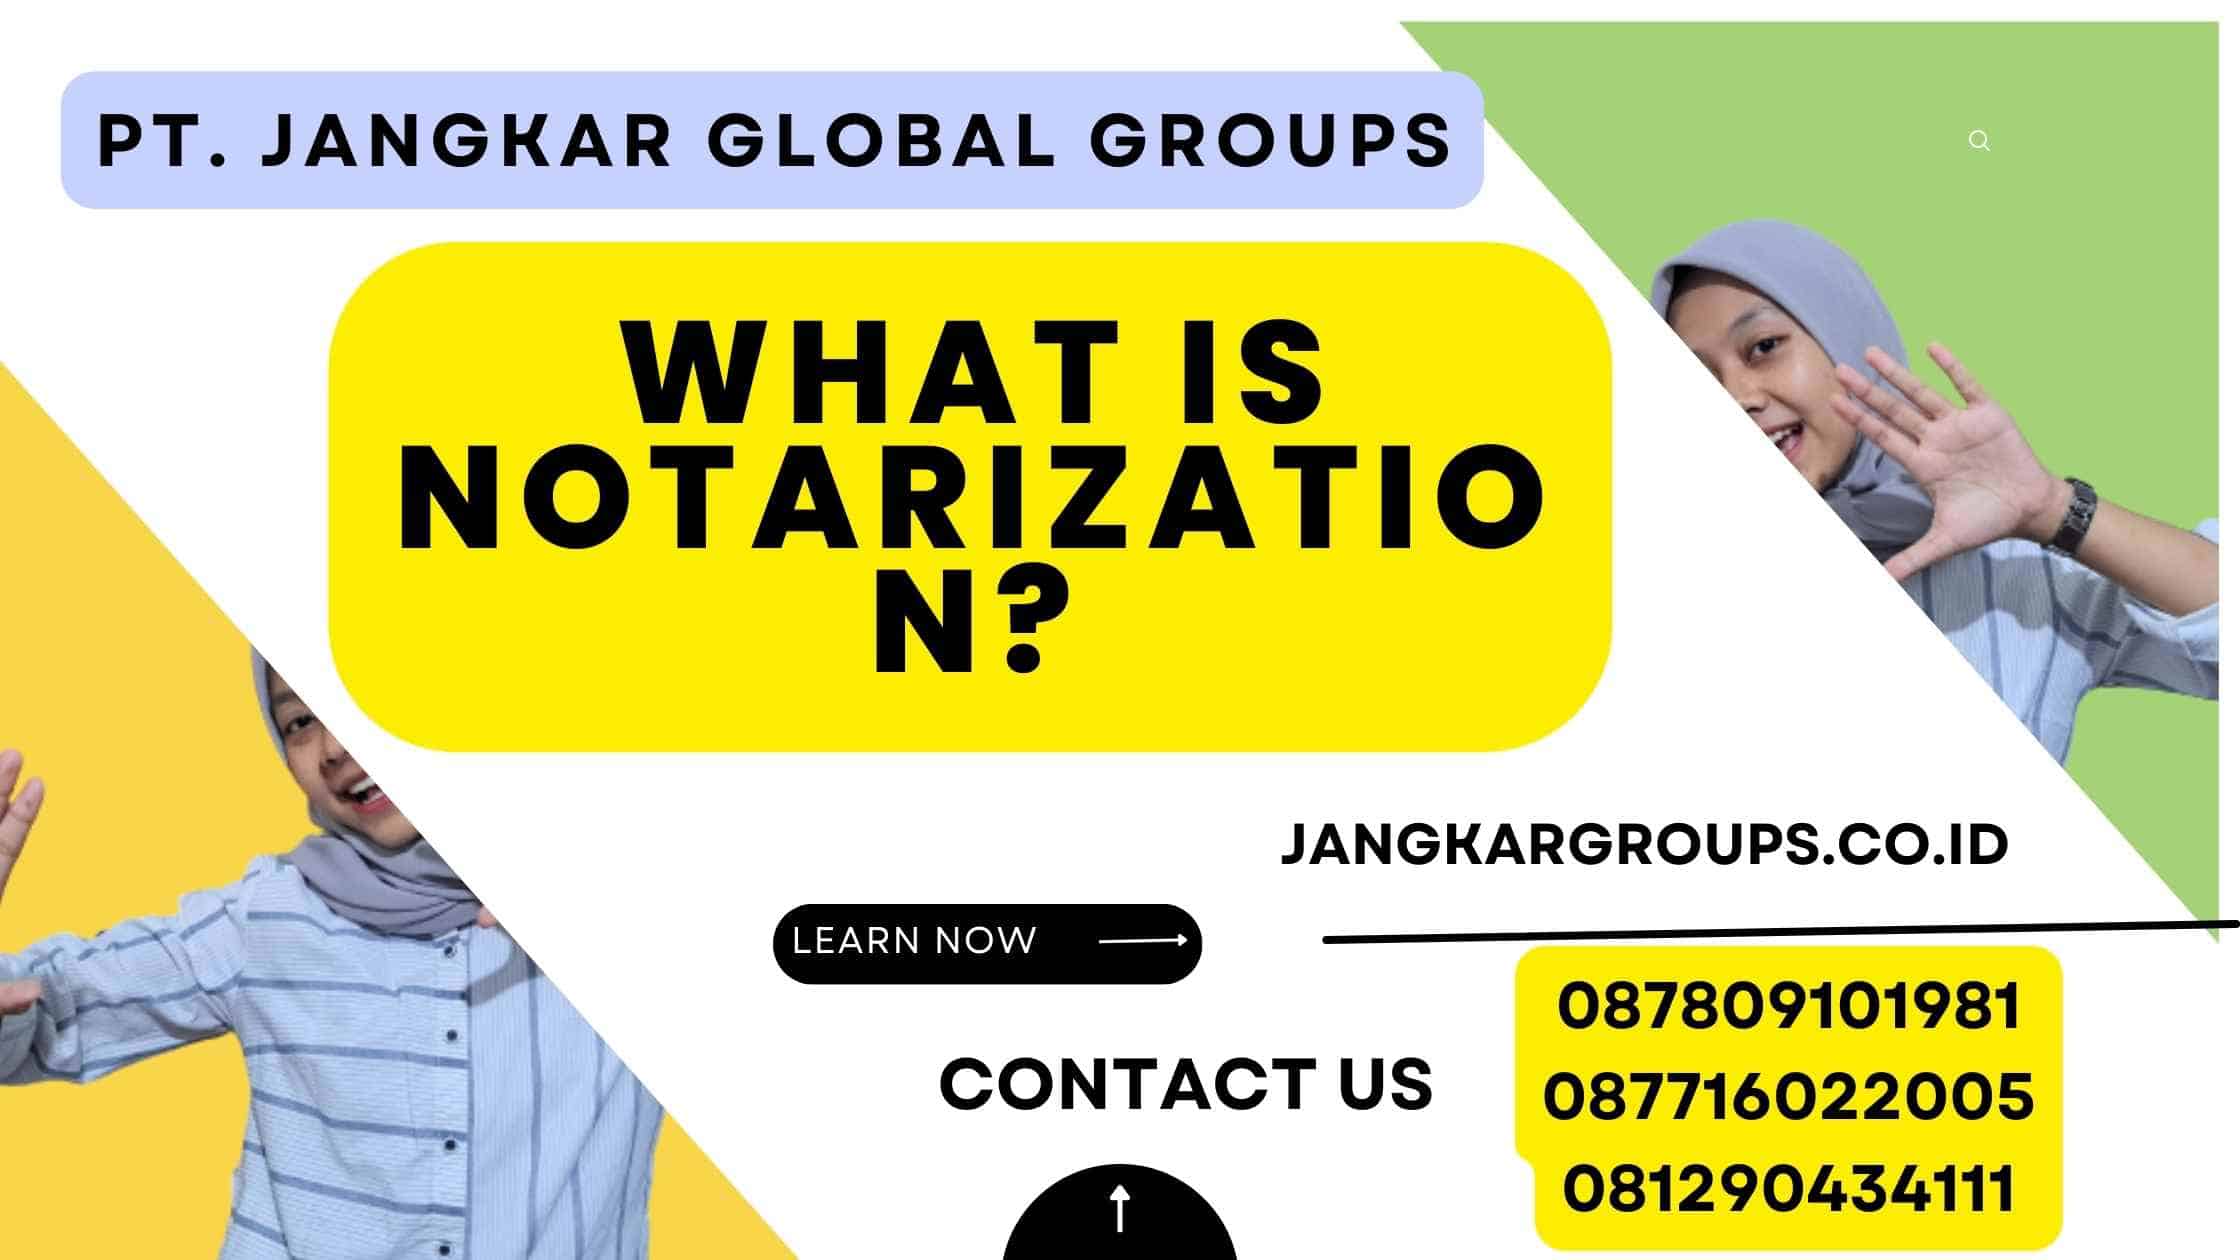 What is Notarization?